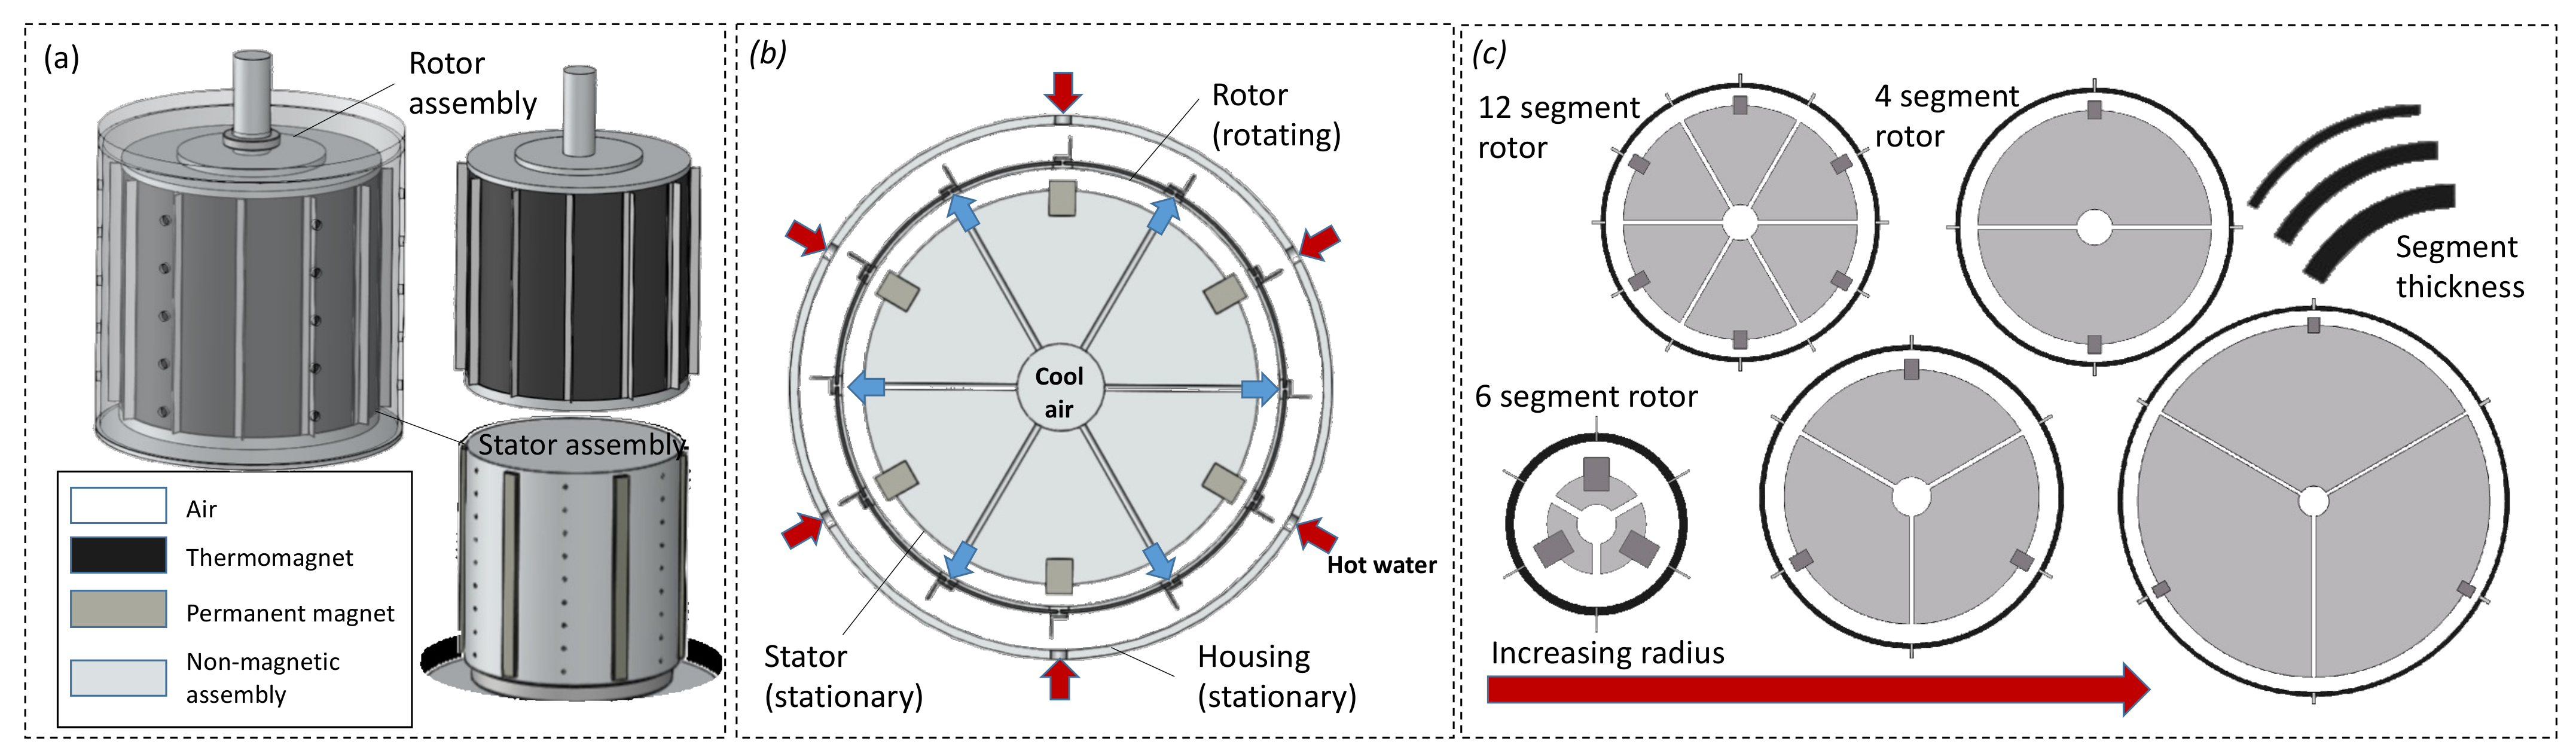 Energies | Free Full-Text | Design Optimization of a Rotary Thermomagnetic  Motor for More Efficient Heat Energy Harvesting